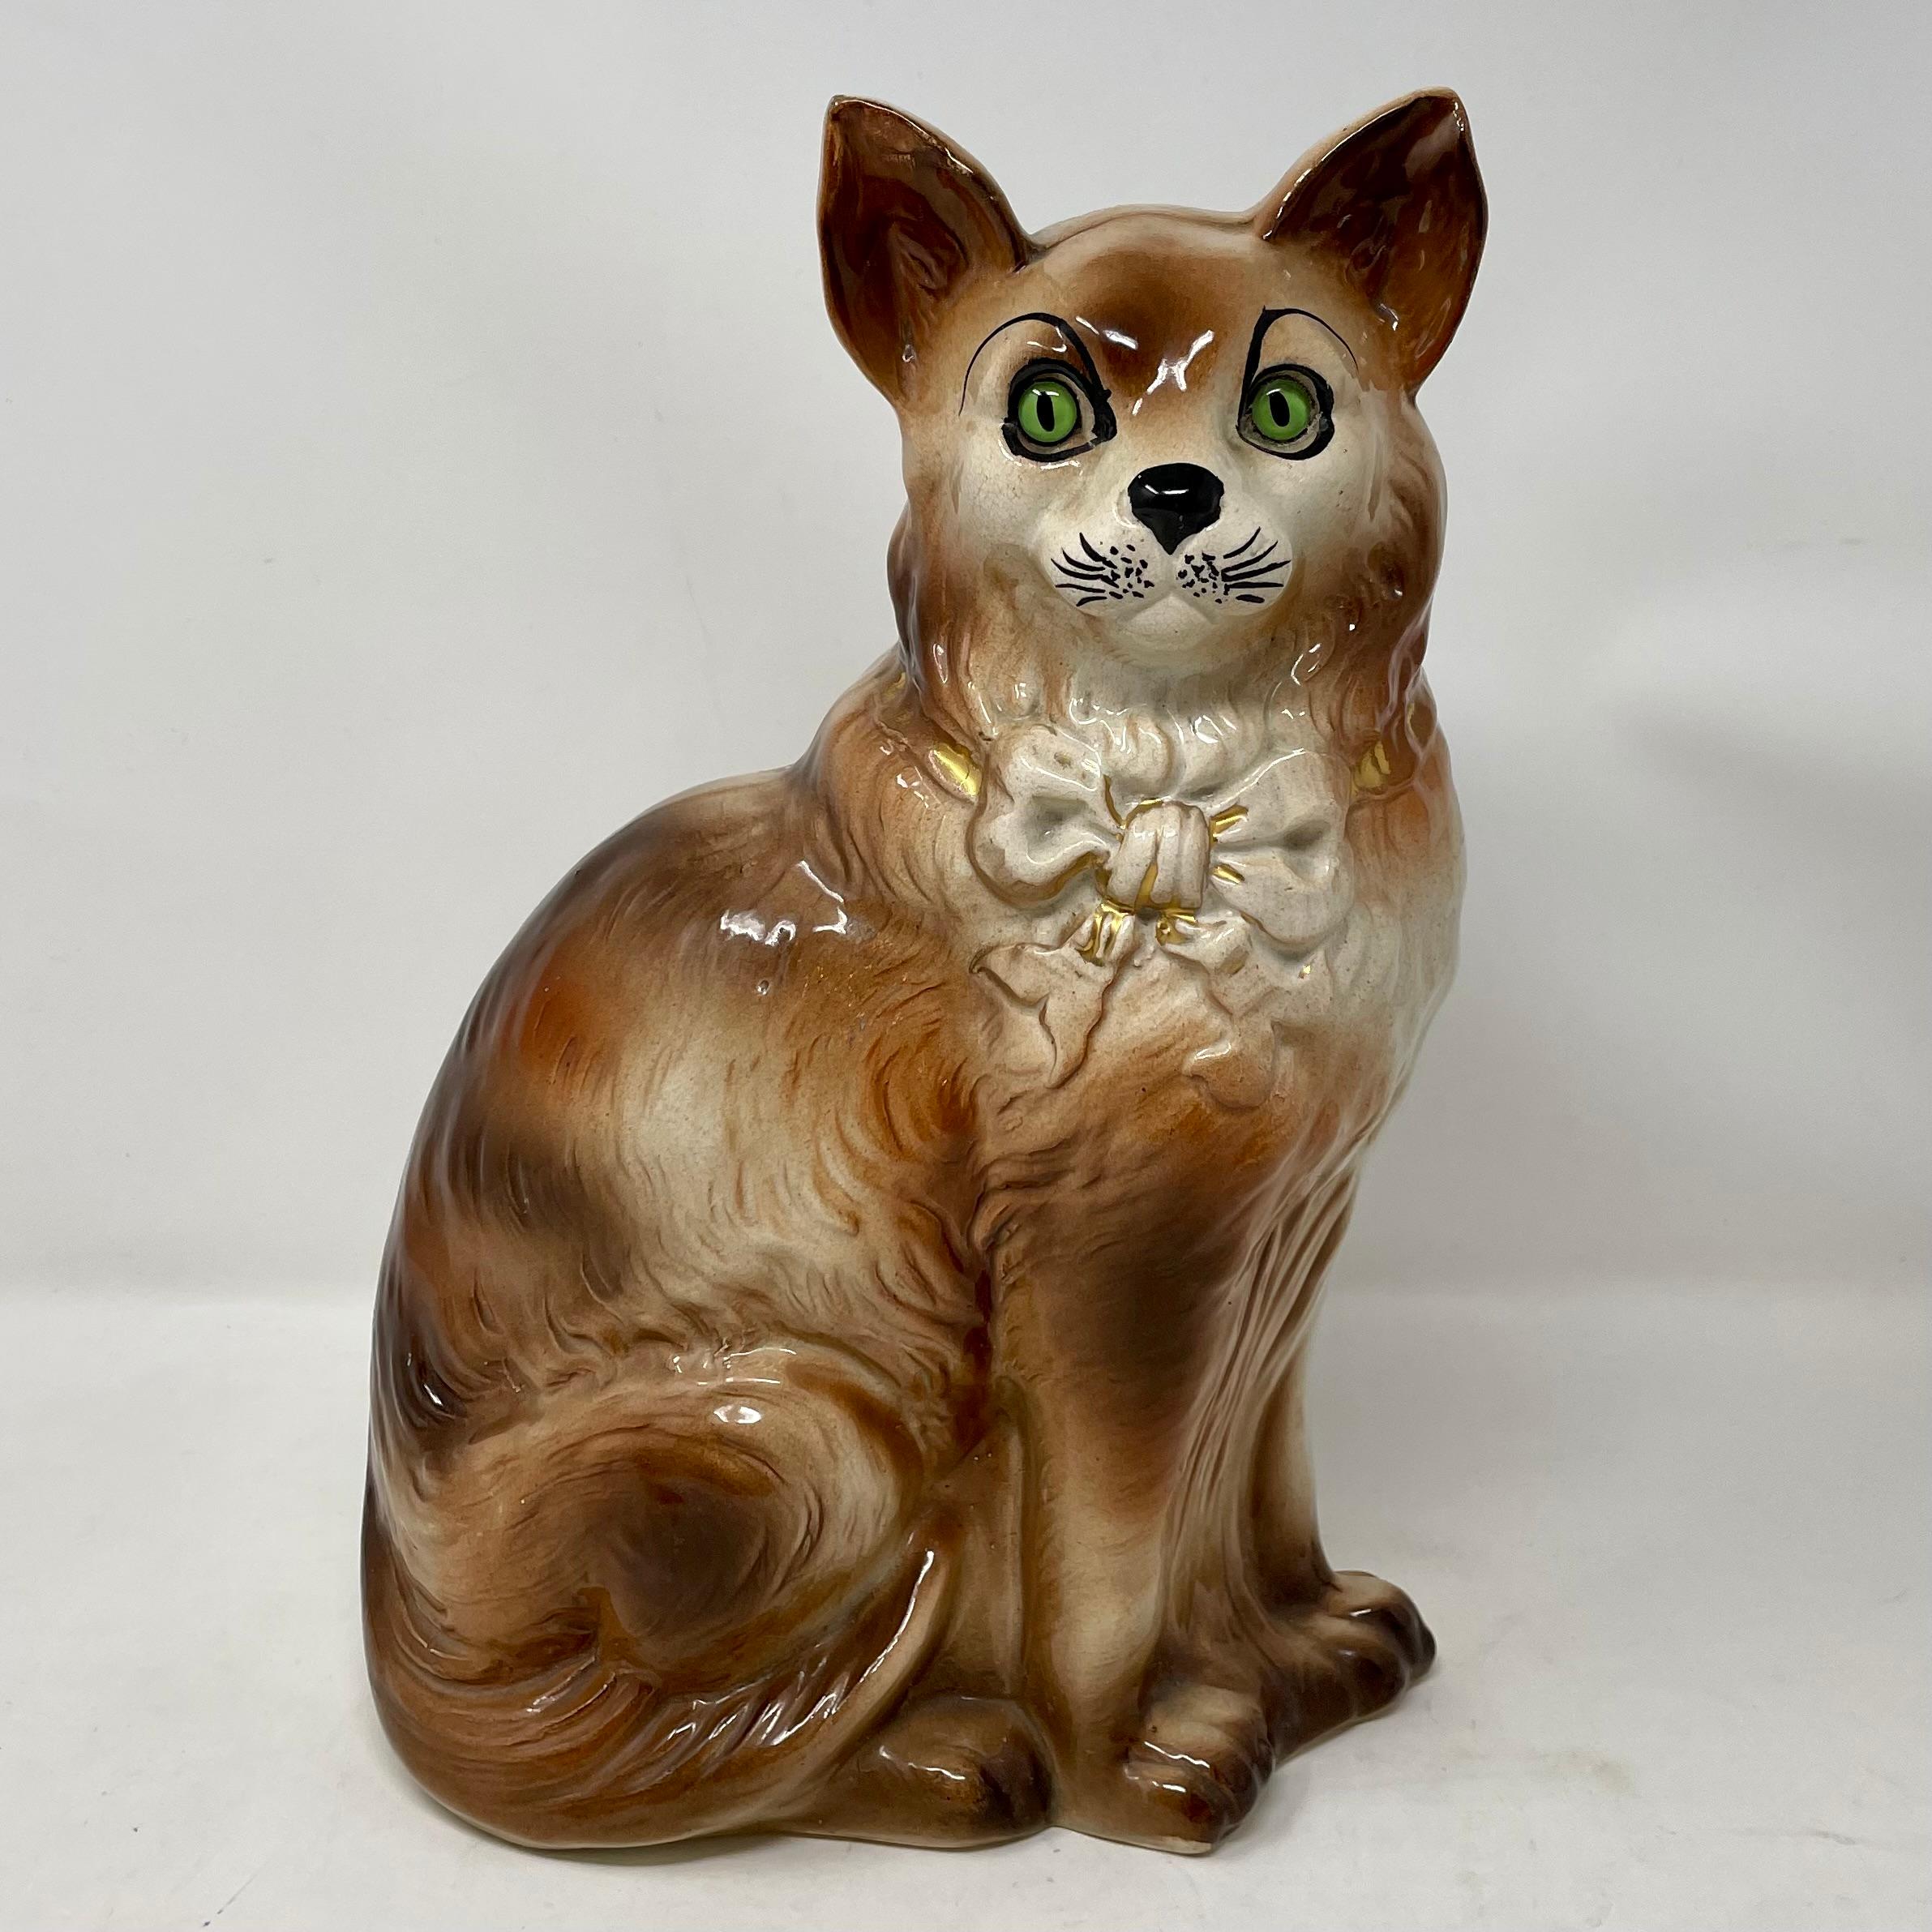 Pair antique Scottish Bo'ness pottery tabby cats with green glass eyes, circa 1880.

Bo'ness, Scotland (formerly-as Borrowstounness is the current name) port town where pottery was made 18th and 19th century.